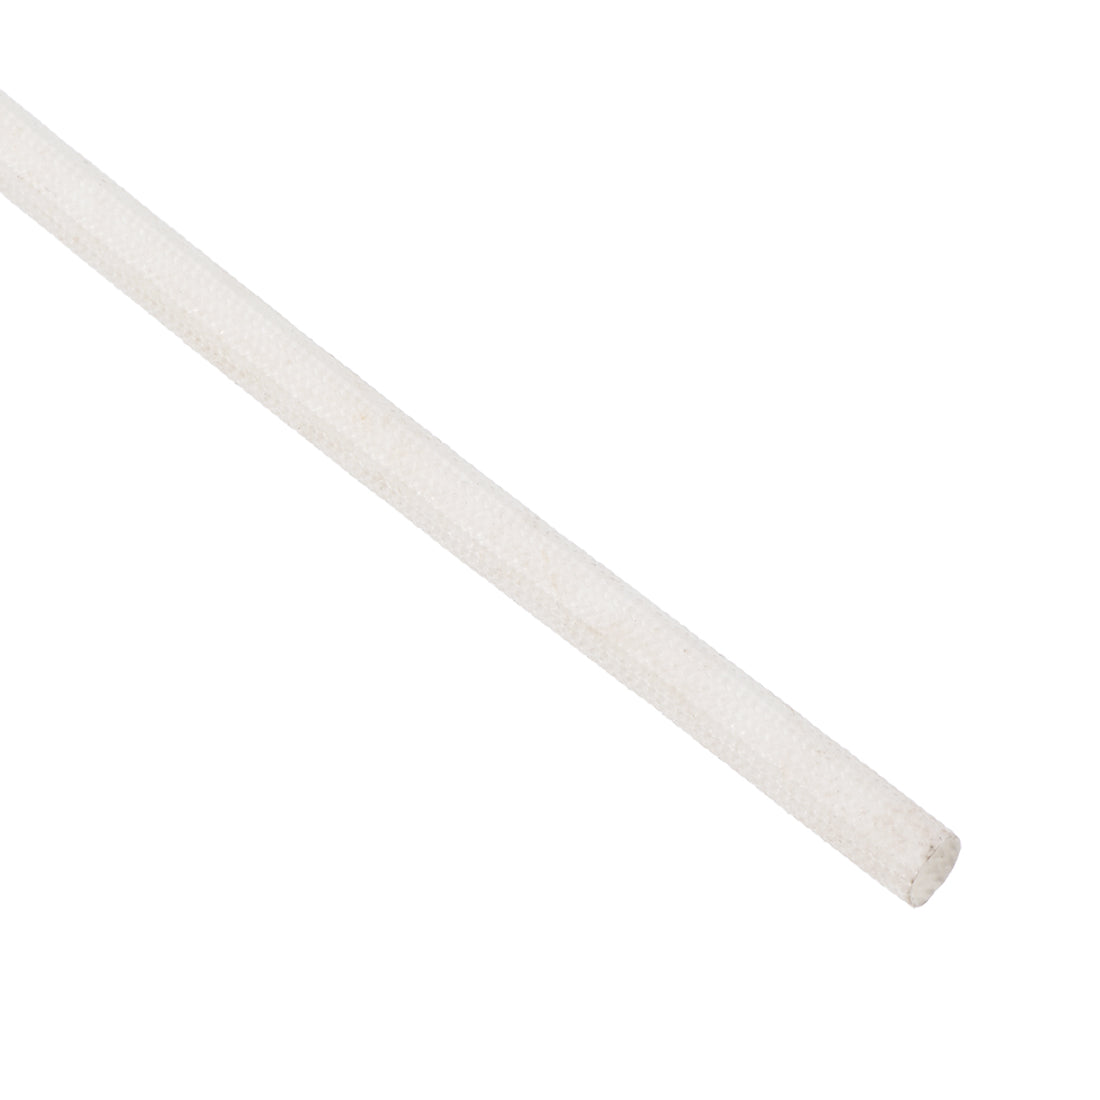 uxcell Uxcell Insulation Cable Protector,16.4Ft-3mm High TEMP Silicone Fiberglass Sleeve White